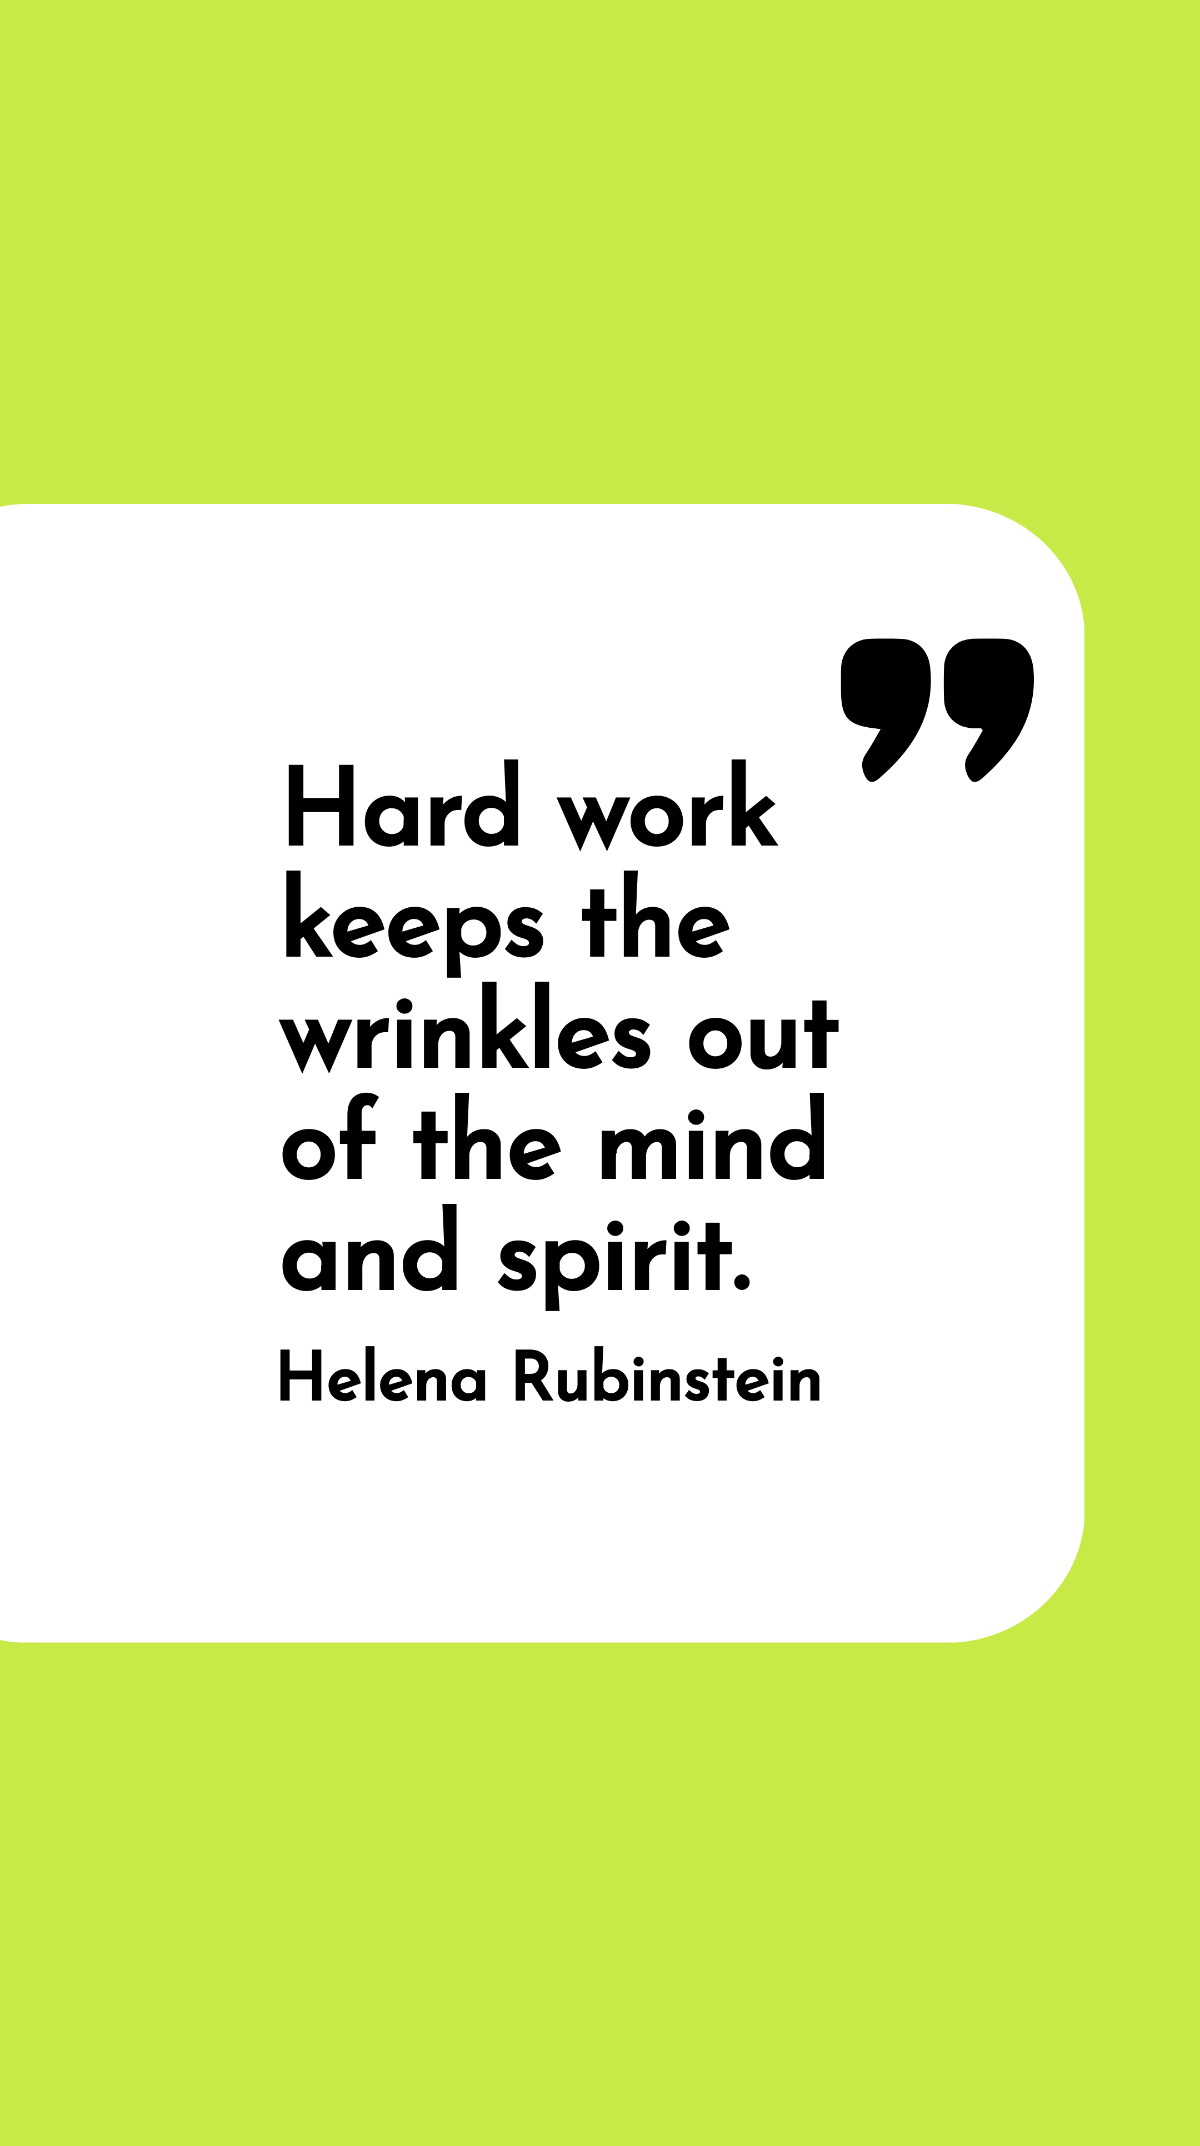 Free Helena Rubinstein - Hard work keeps the wrinkles out of the mind and spirit. Template